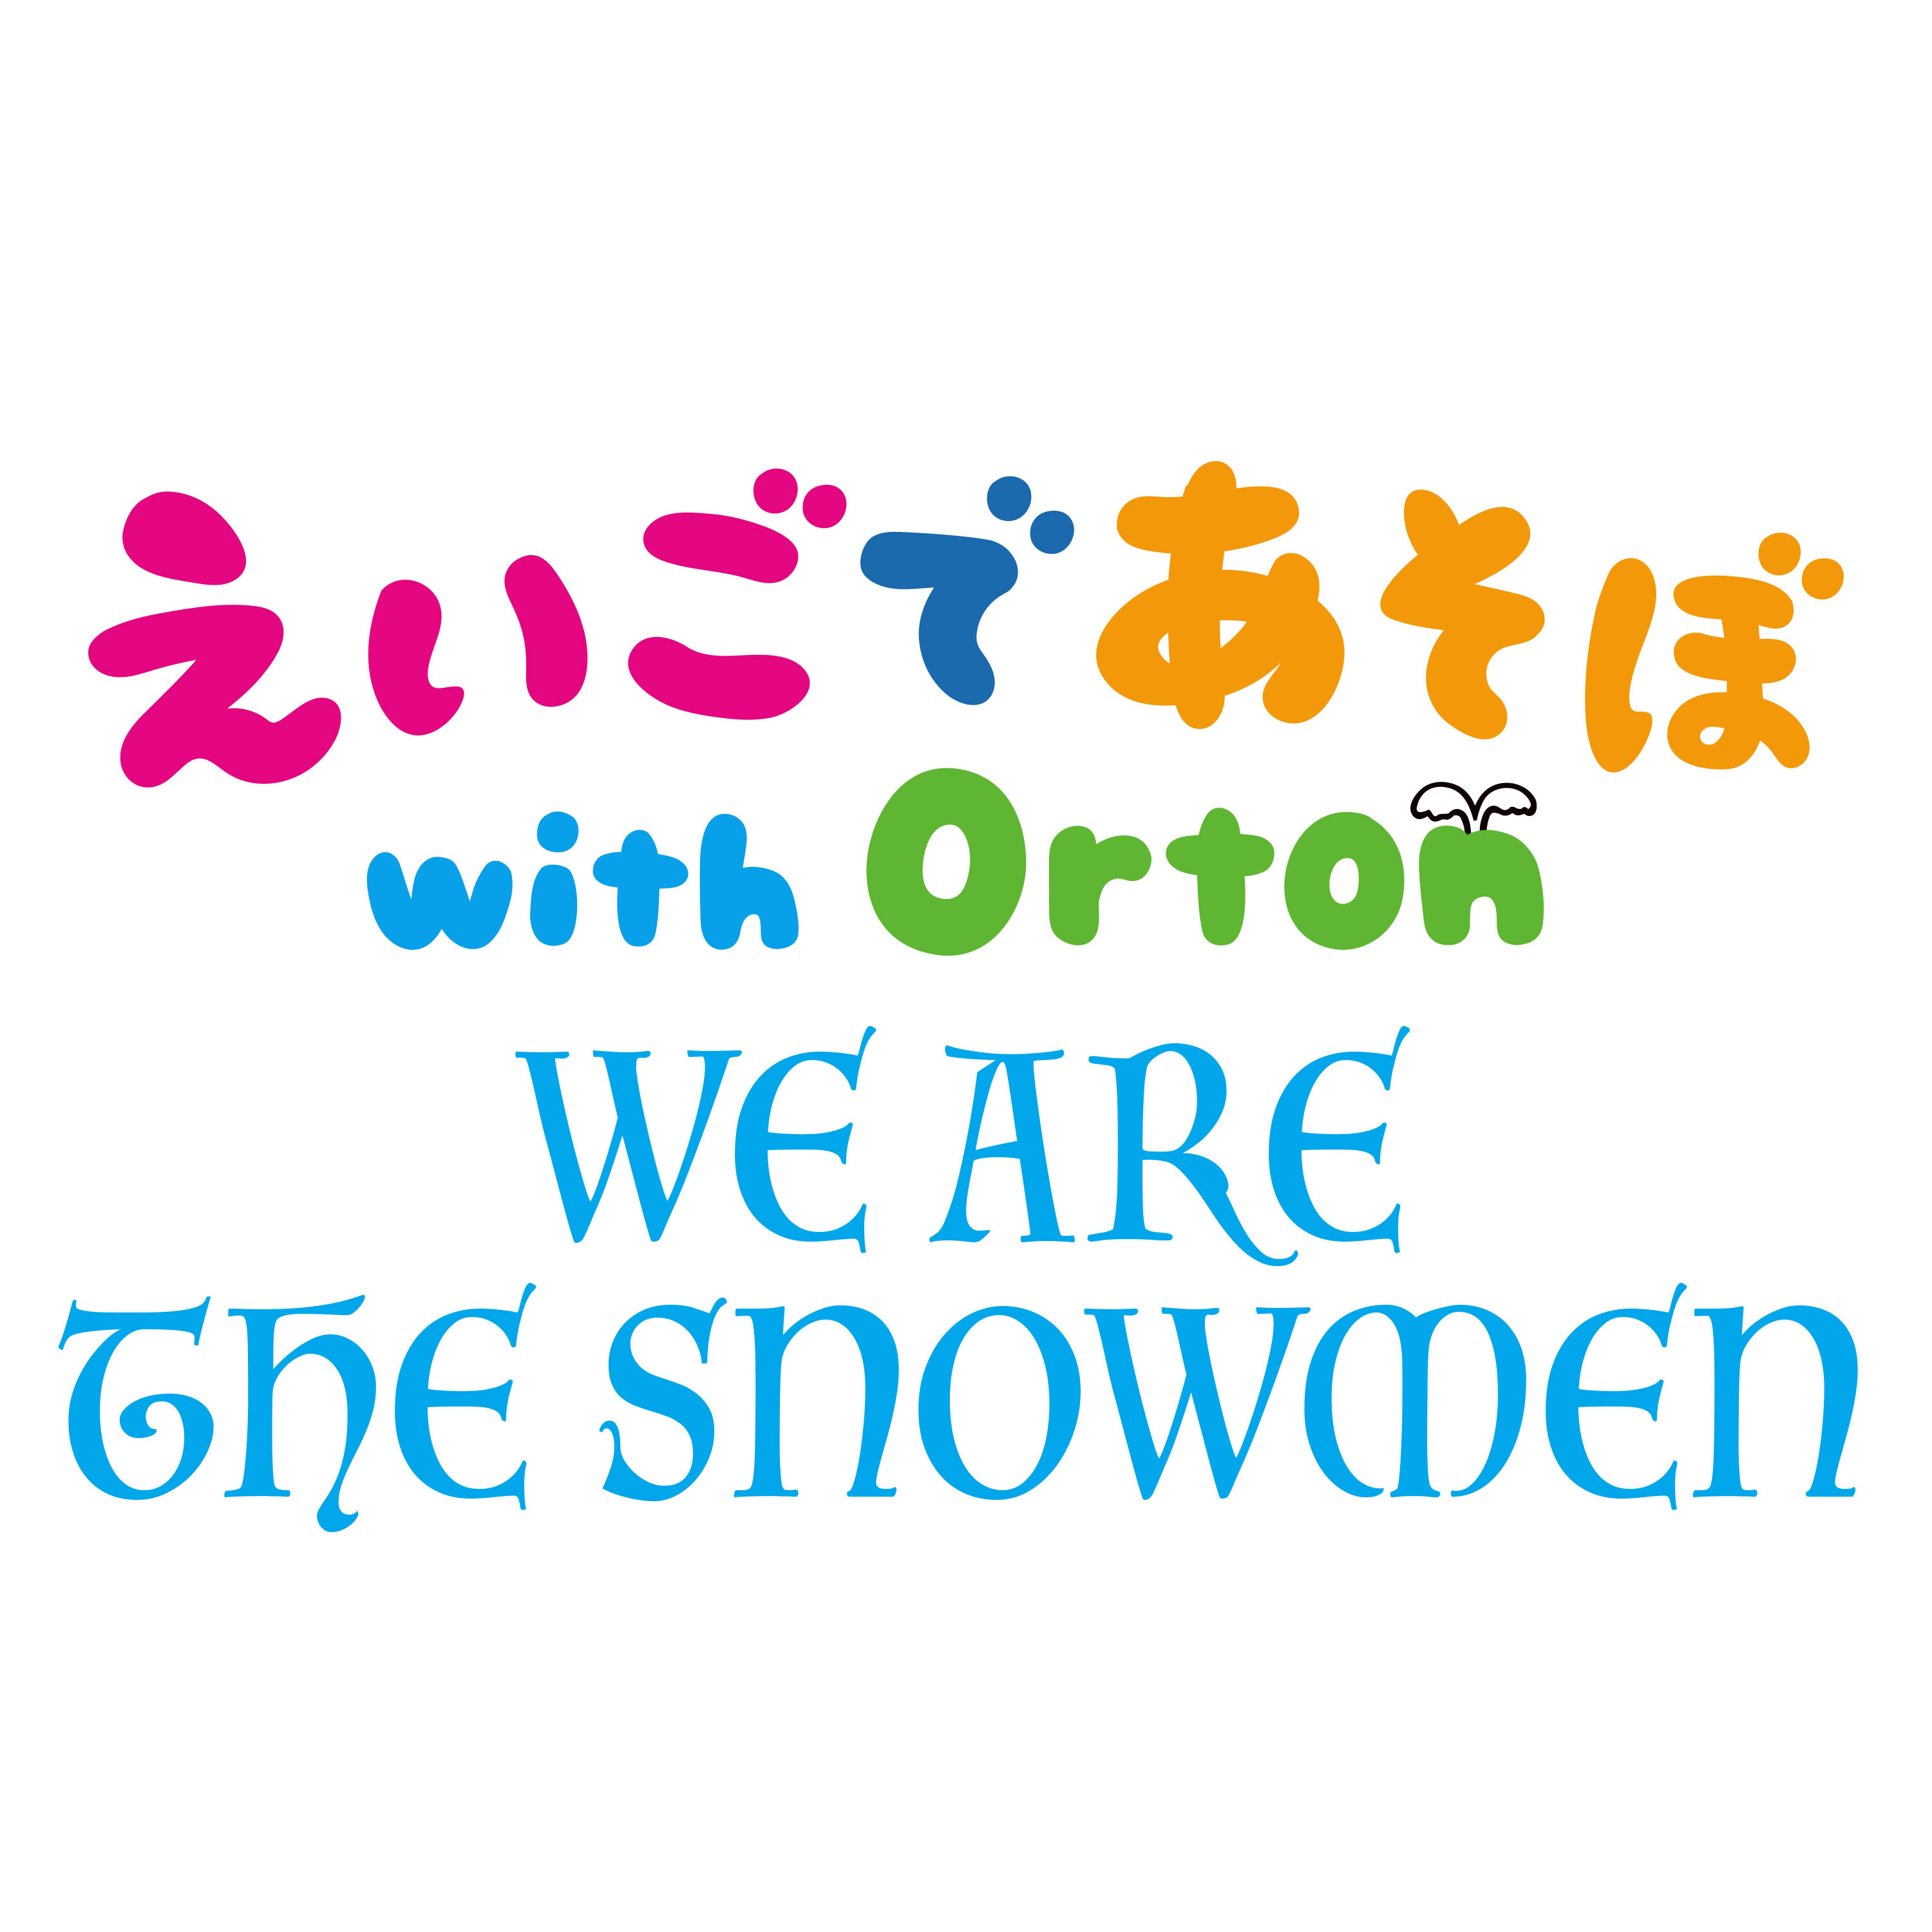 Tweets With Replies By えいごであそぼ With Orton ポニーキャニオン Withorton Twitter